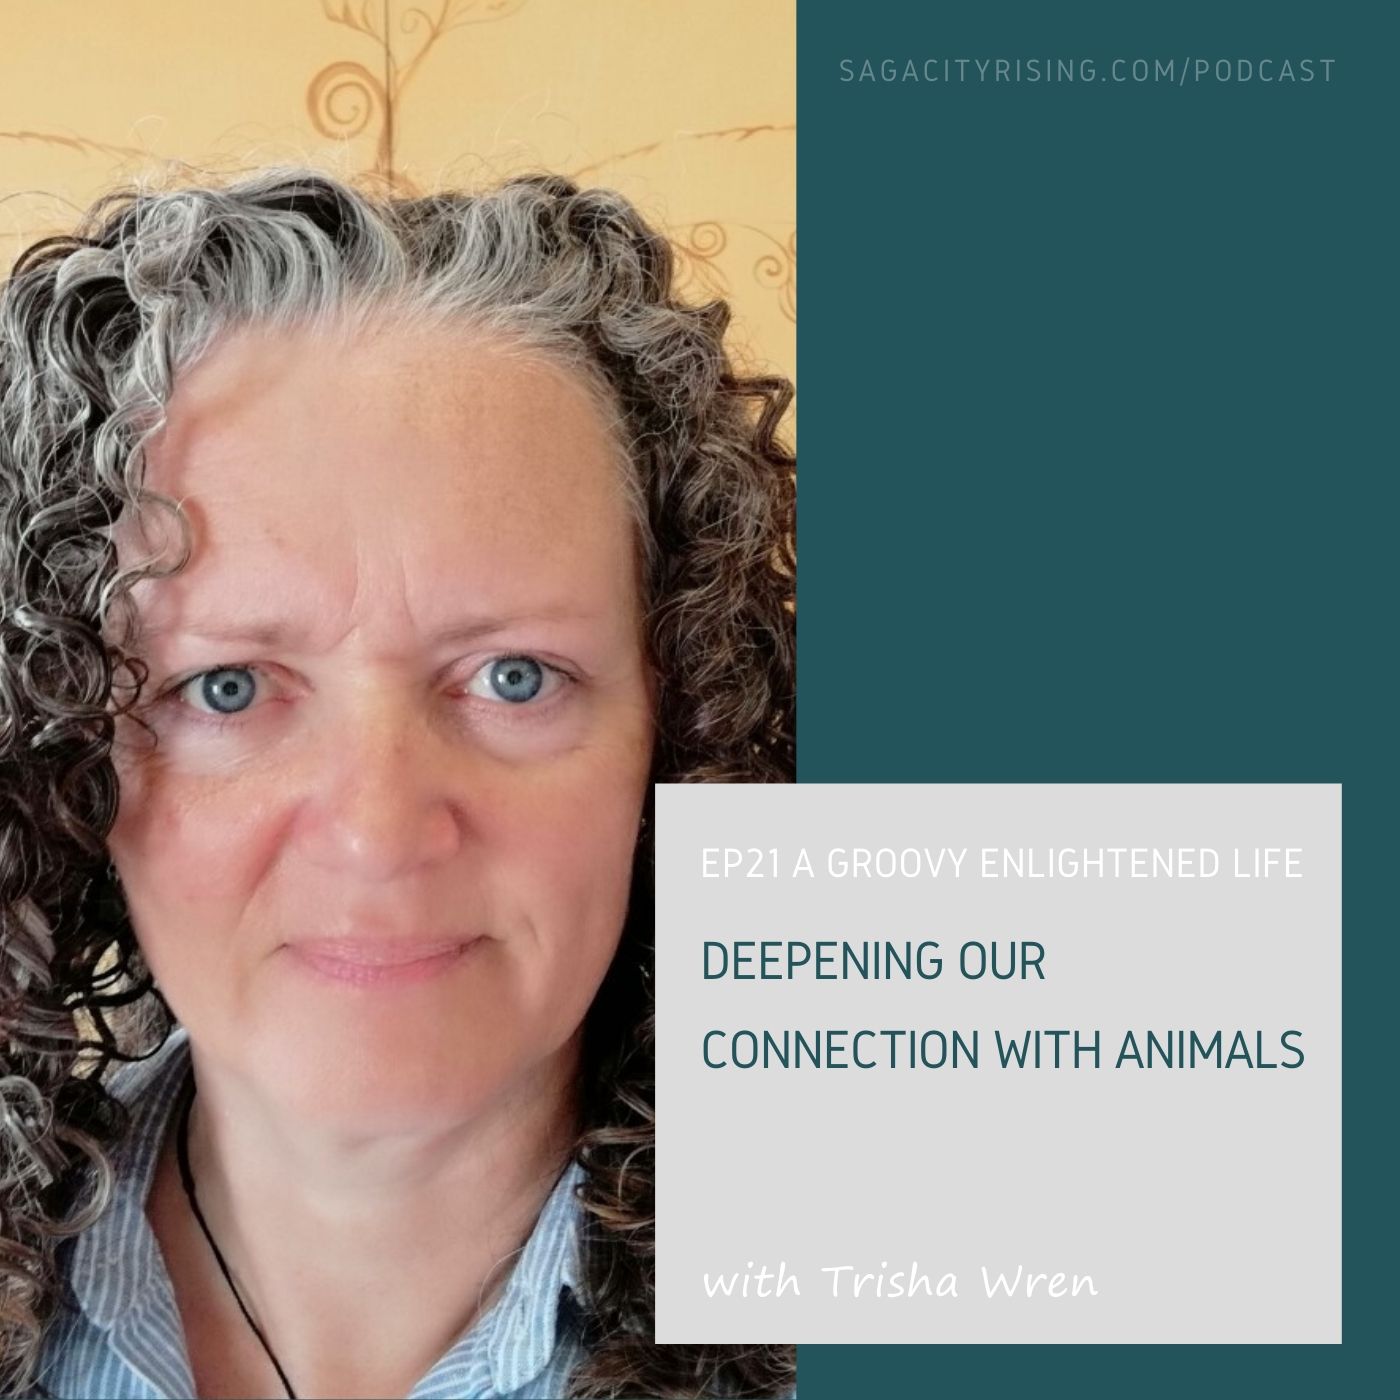 Deepening Our Connection with Animals with Trisha Wren